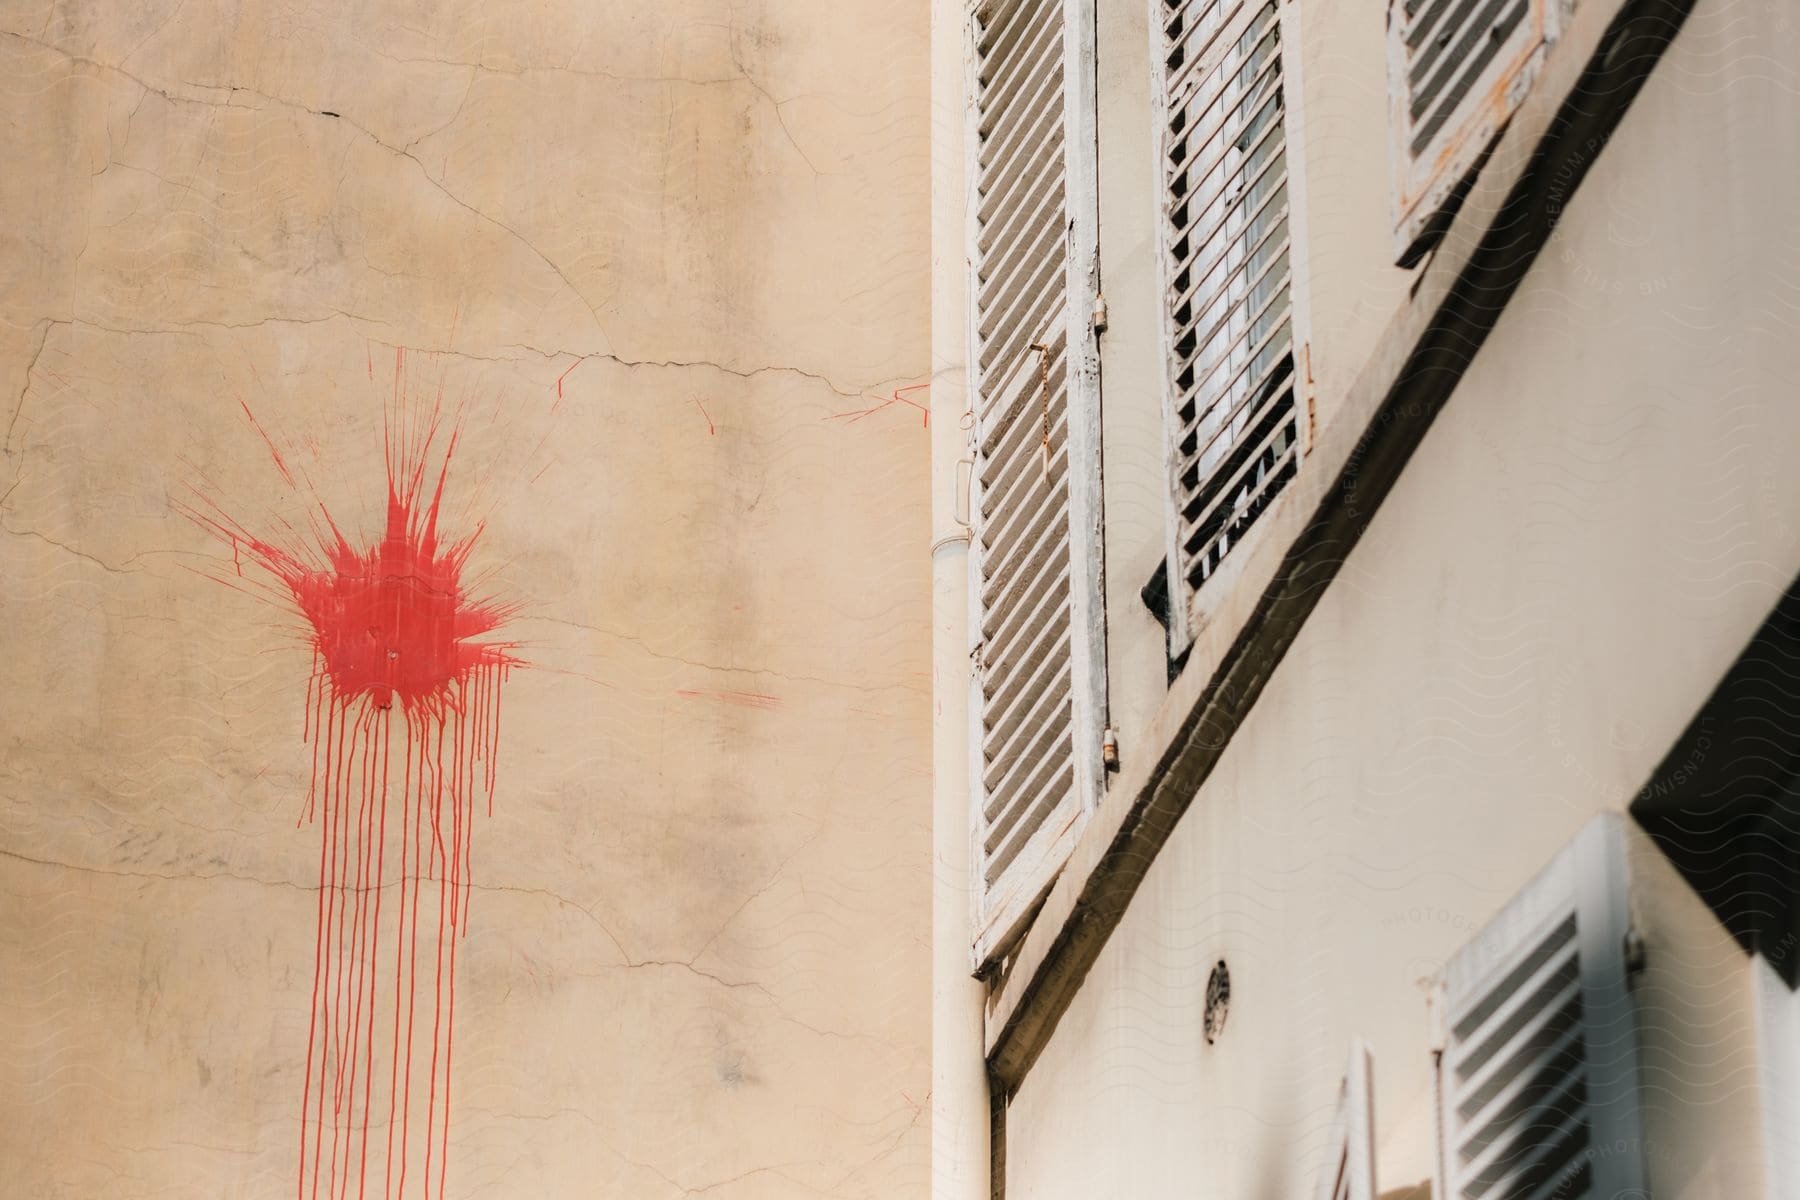 Red paint splattered on a concrete wall exterior next to window shutters